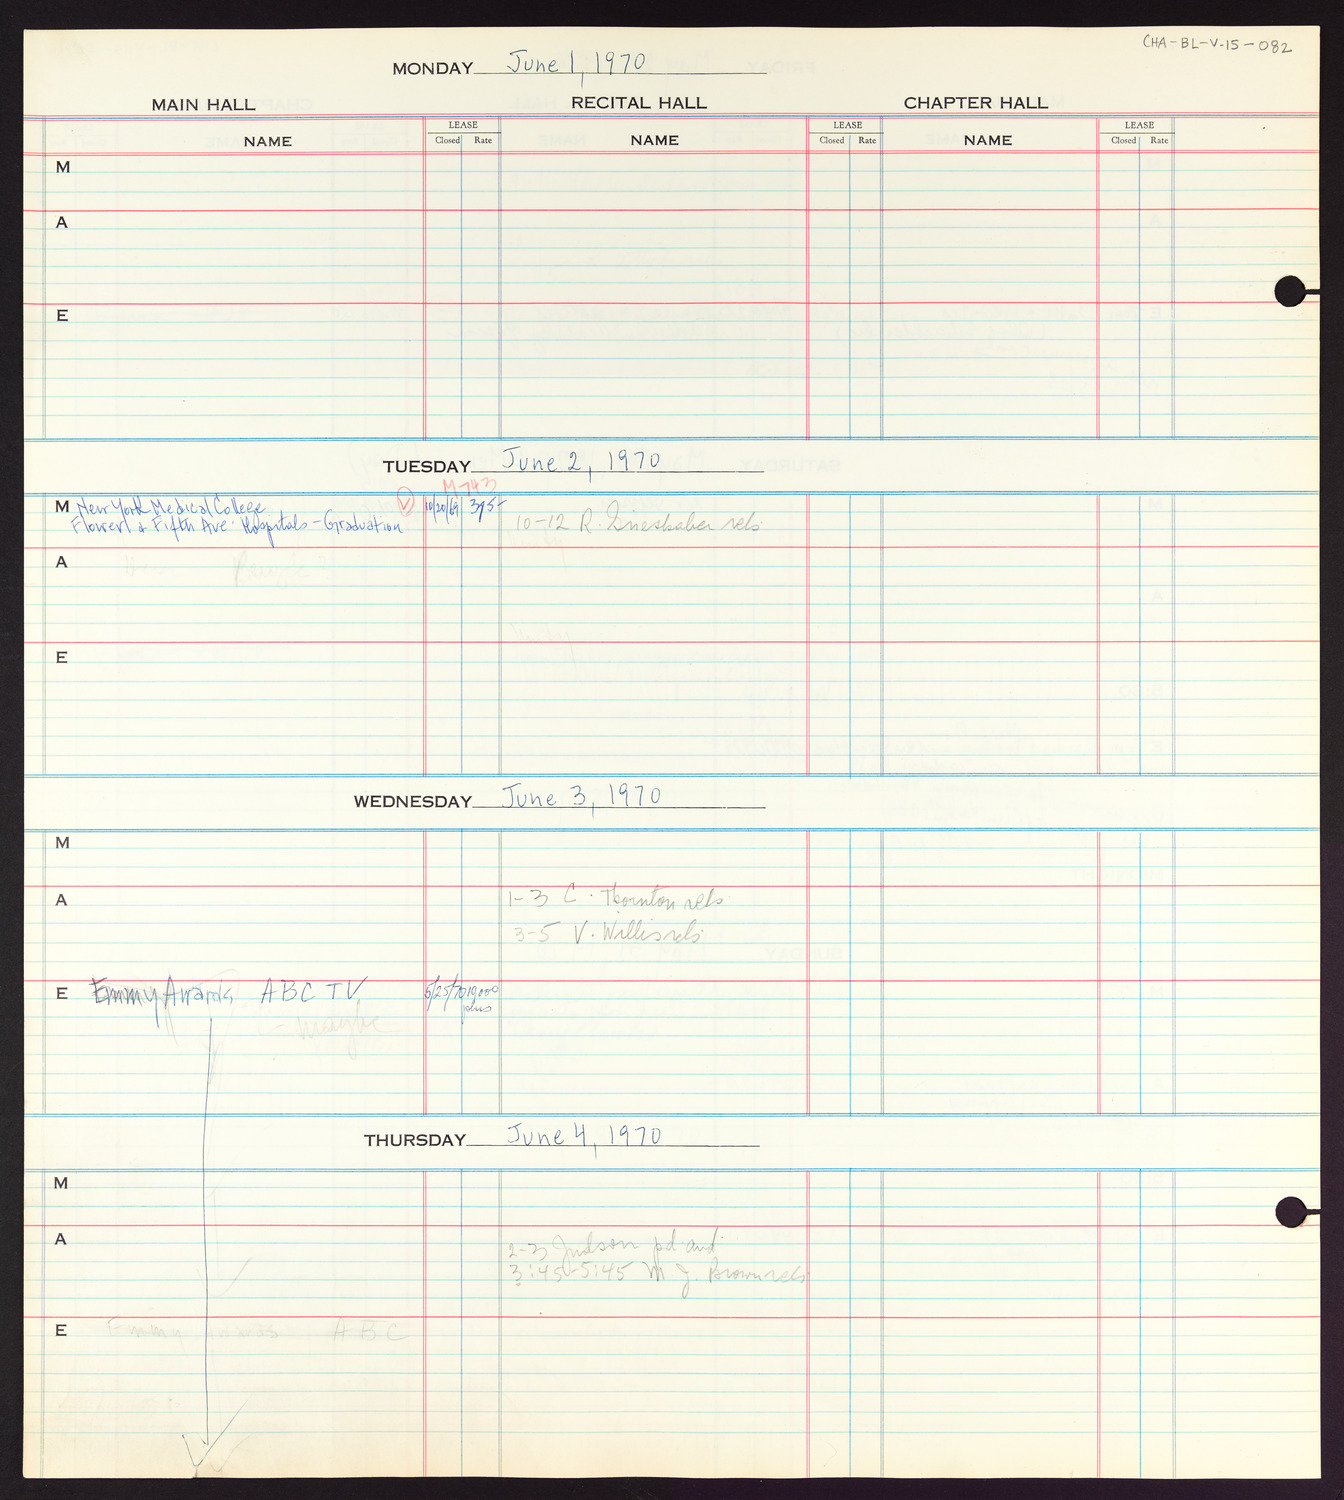 Carnegie Hall Booking Ledger, volume 15, page 82